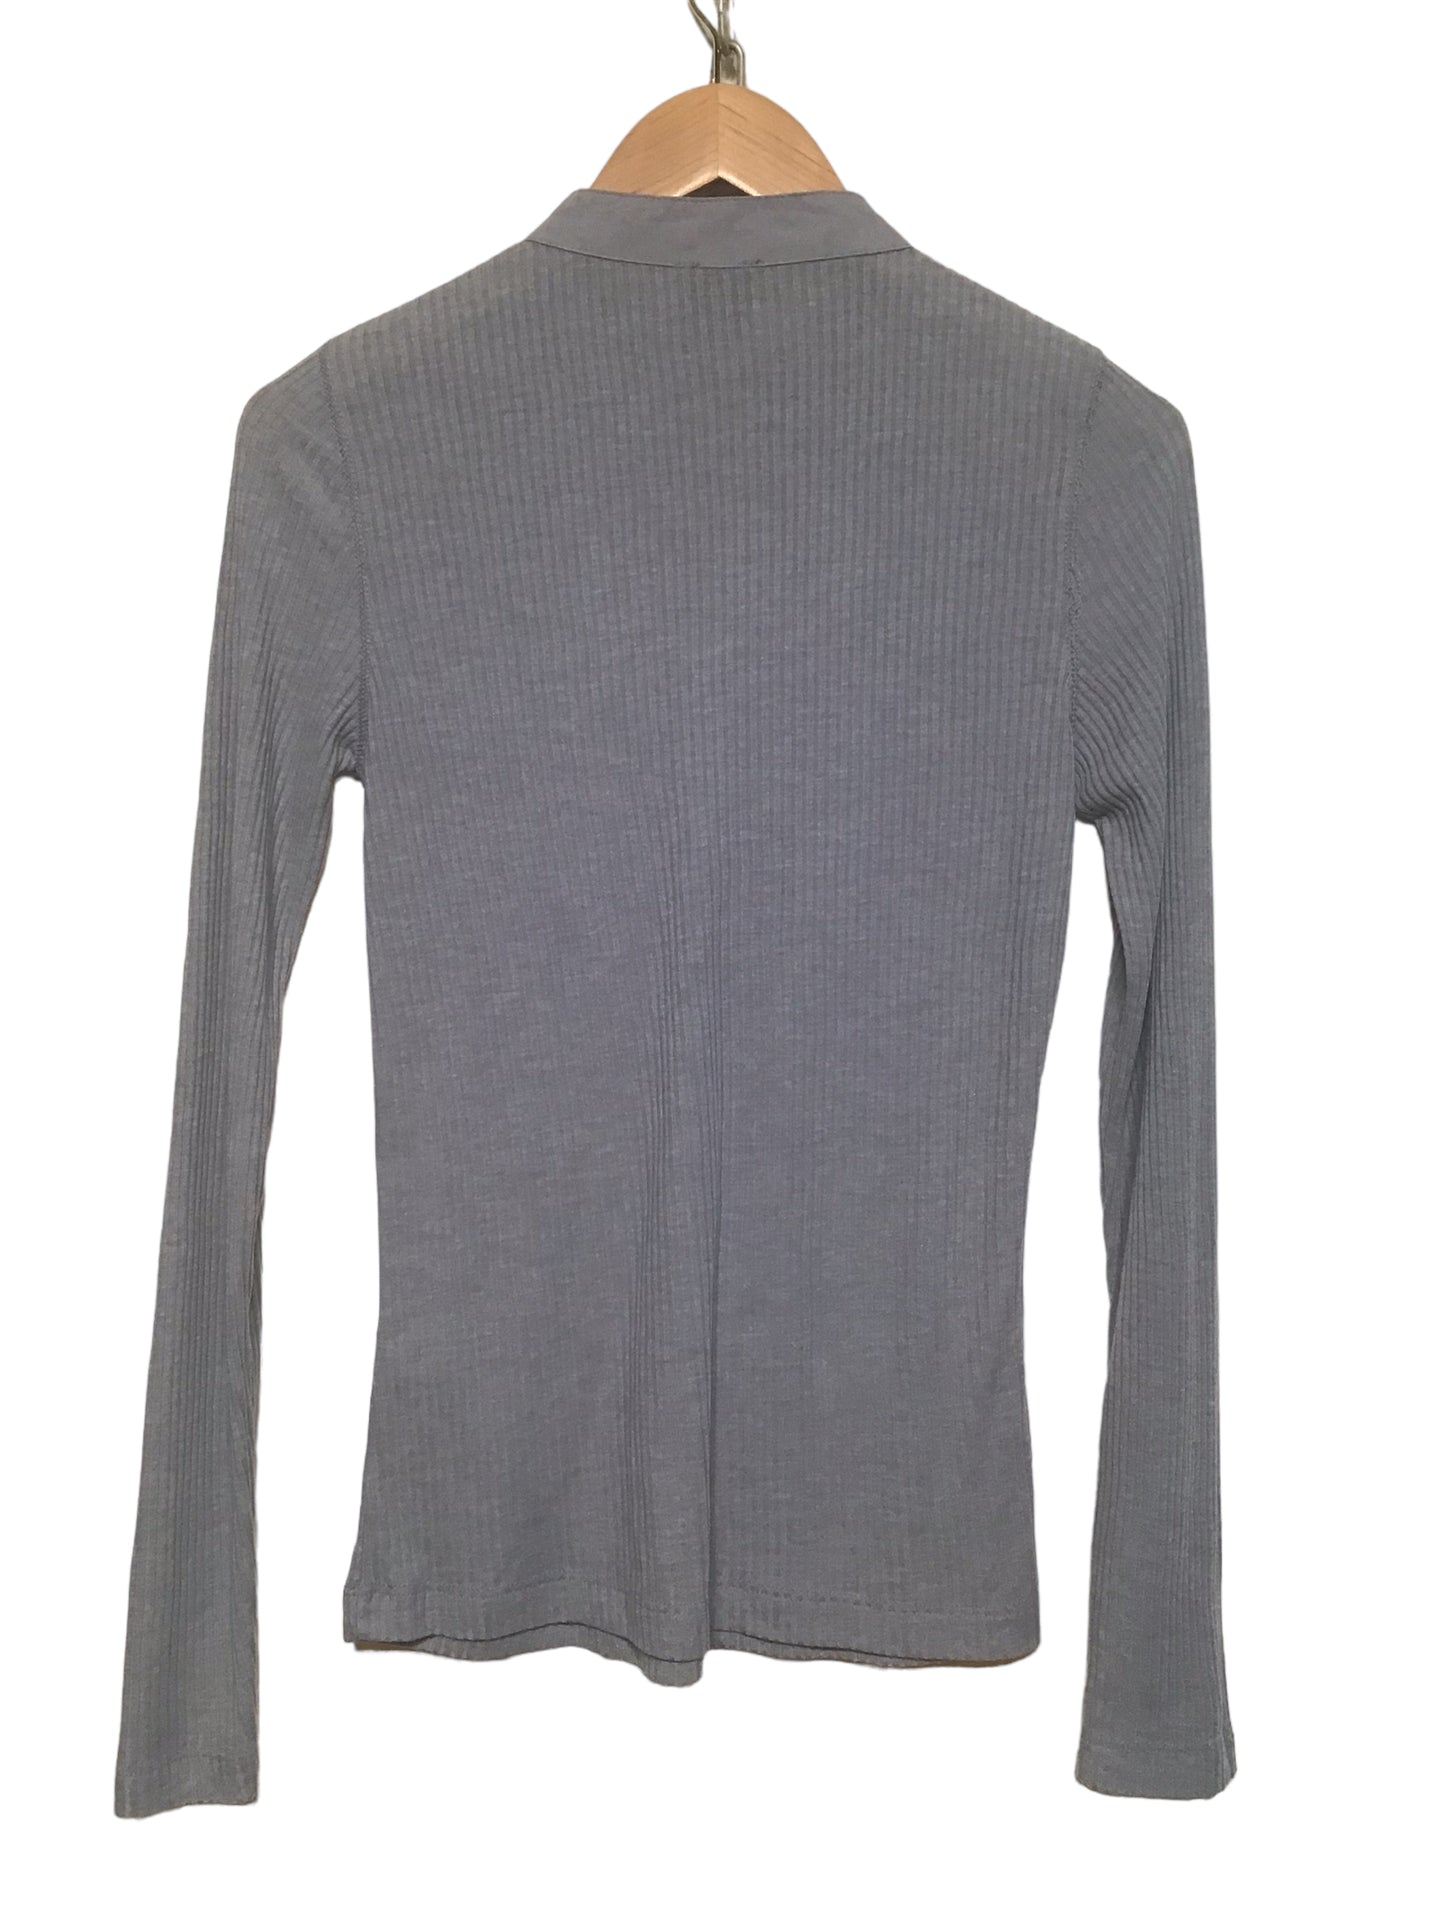 G:21 Long Sleeved Top (Size L)